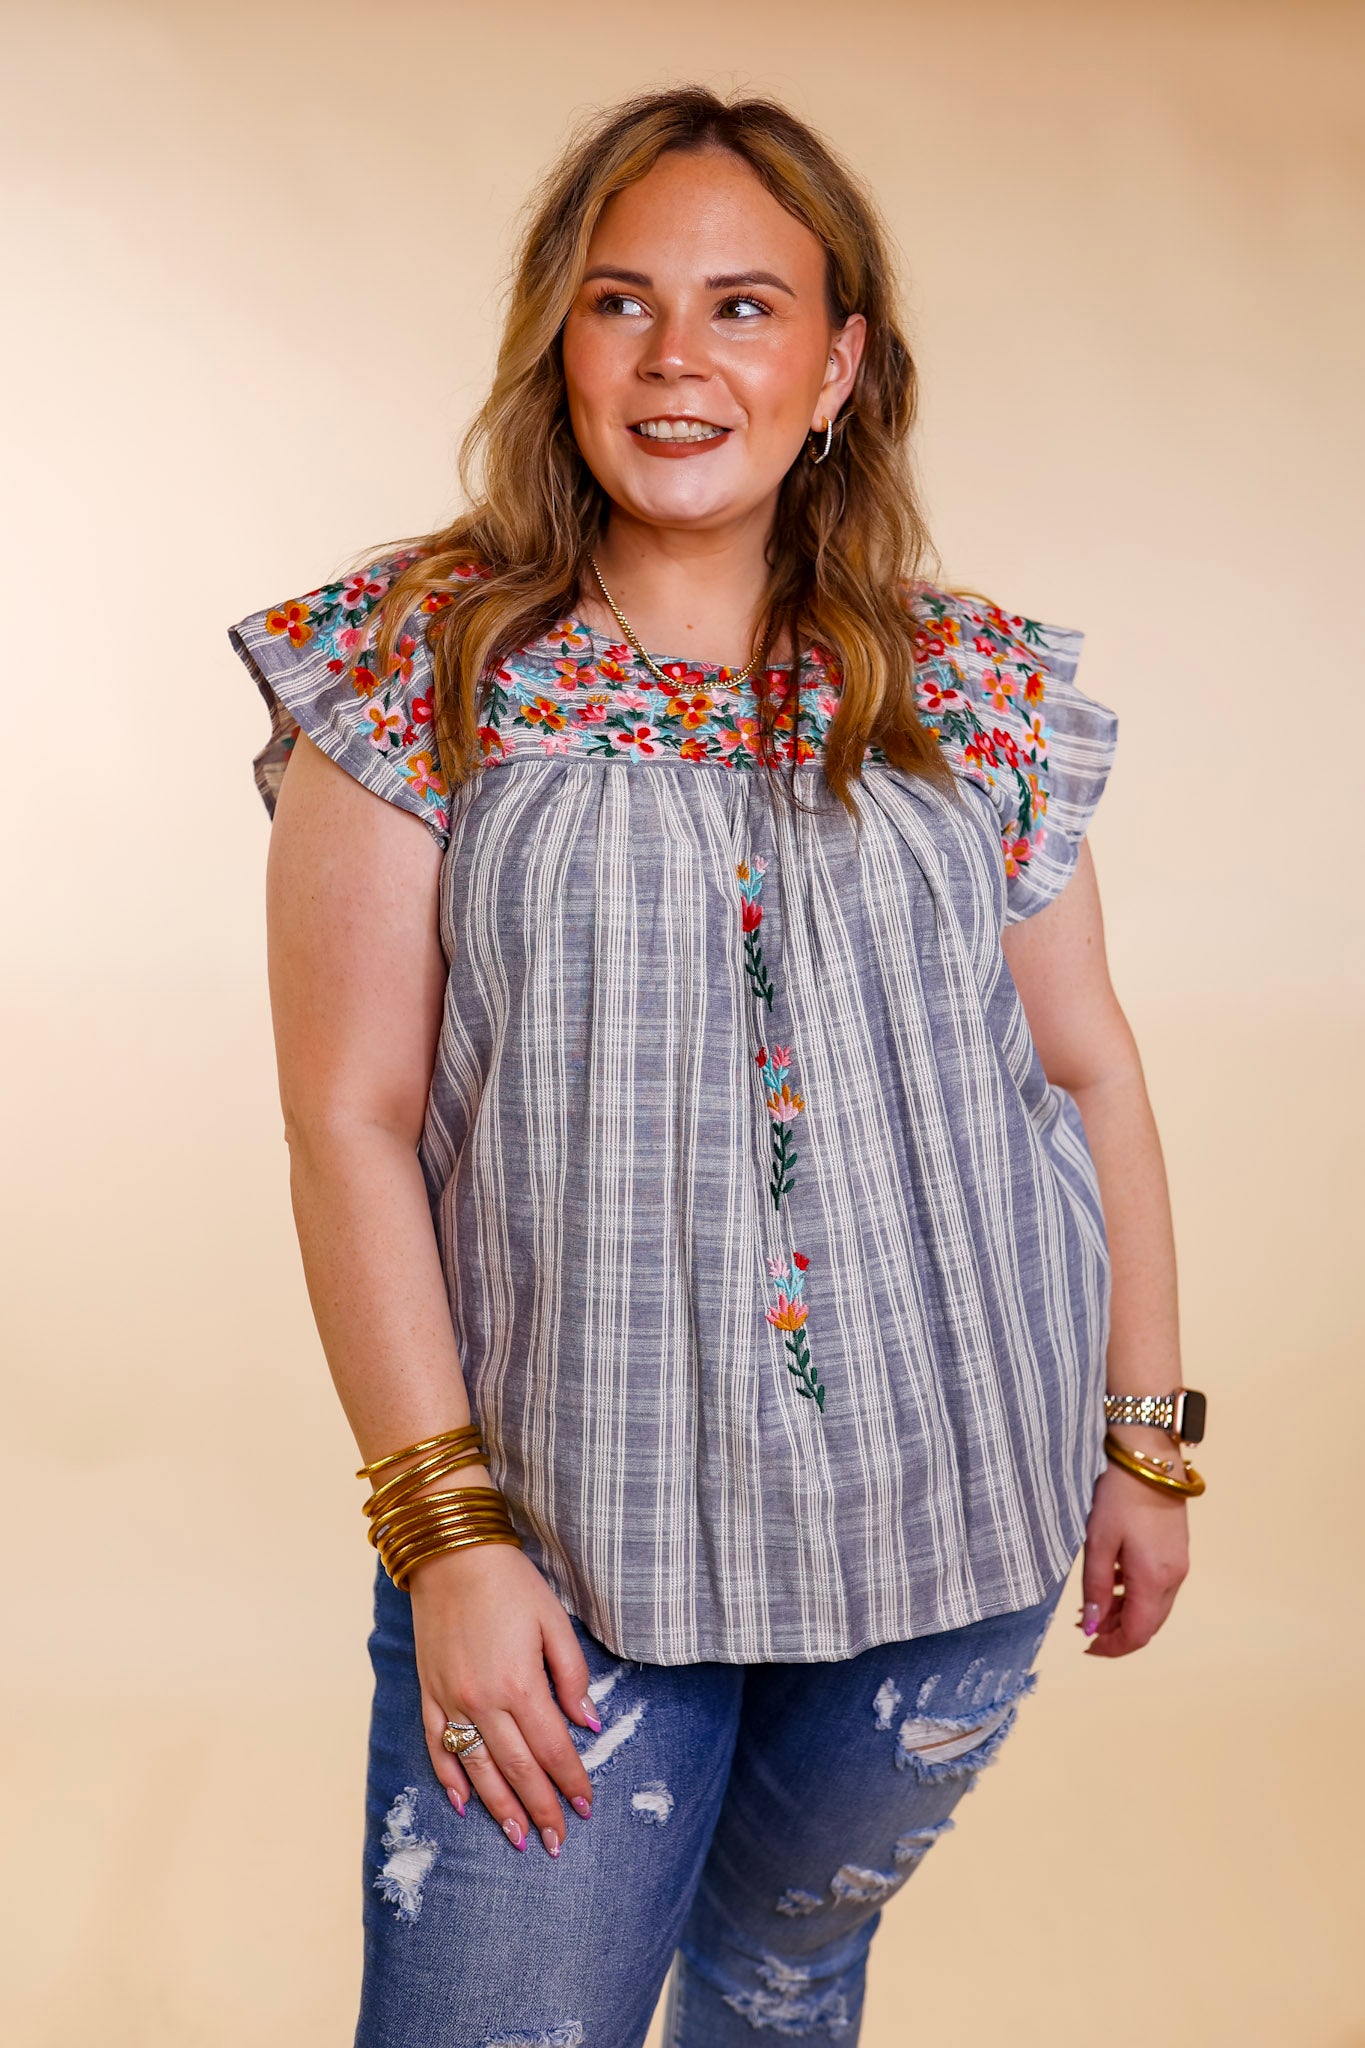 Sweet Success Floral Embroidered Striped Top with Ruffle Cap Sleeves in Dusty Blue - Giddy Up Glamour Boutique